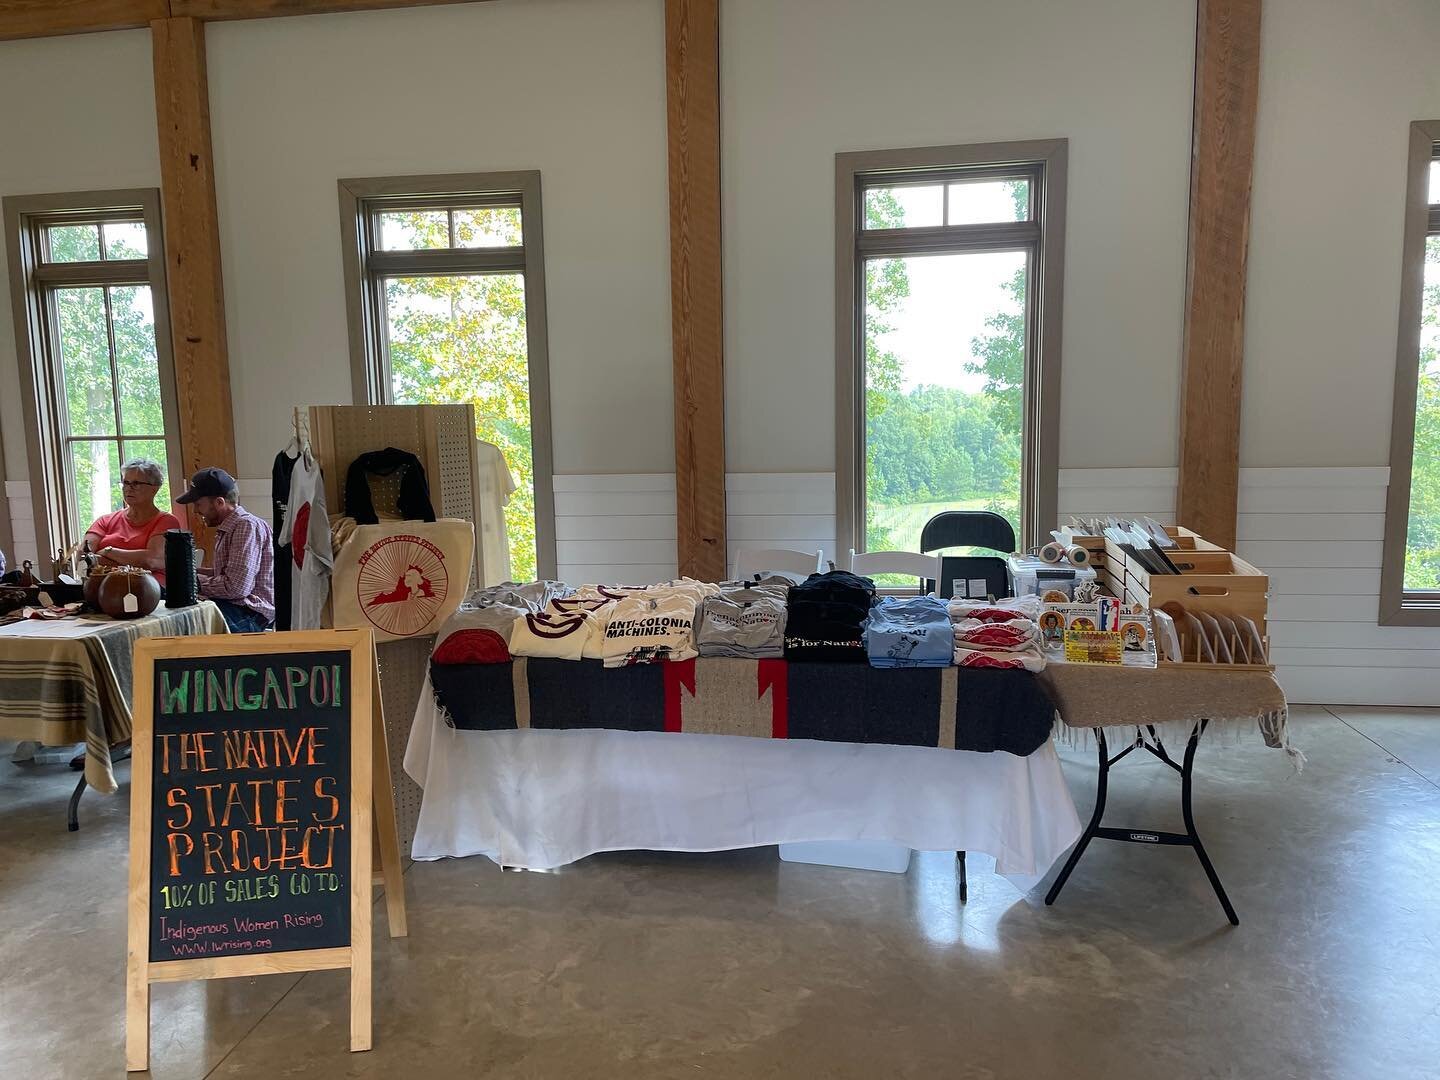 We are at the Kenaanee intertribal indigenous market @saudecreekvineyards in New Kent county it&rsquo;s a beautiful day for a drive! Come out and see us! 11-5